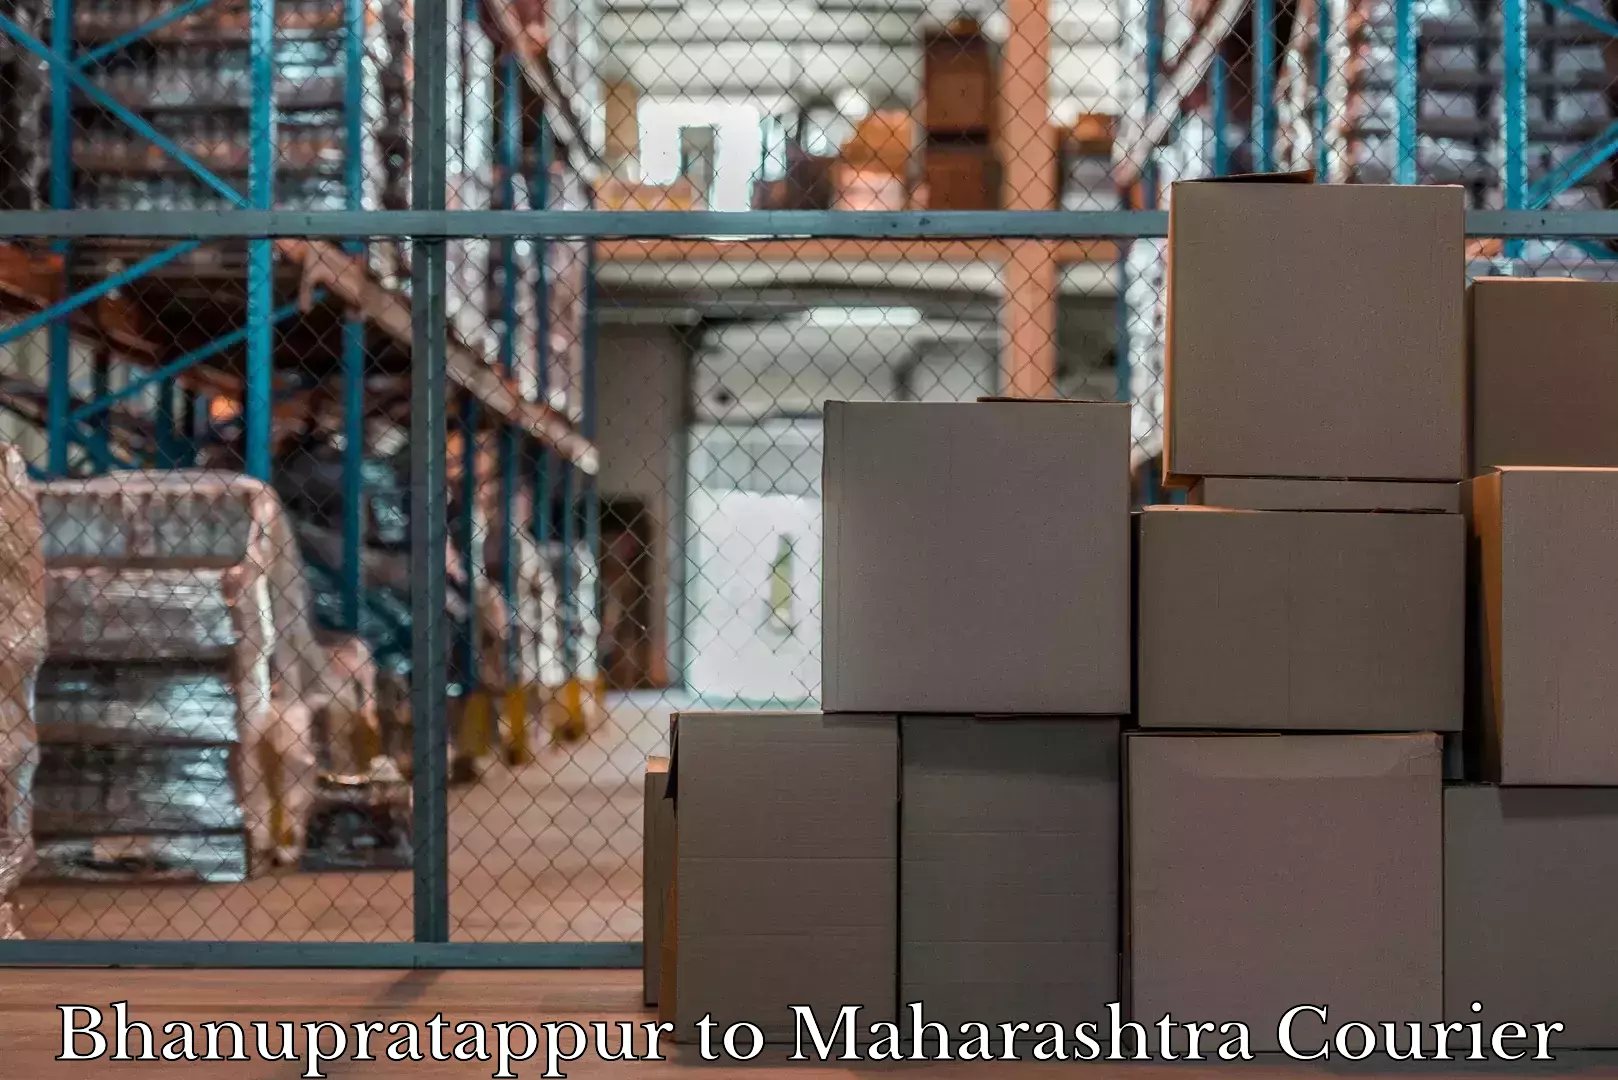 Baggage shipping experience Bhanupratappur to DY Patil Vidyapeeth Pune